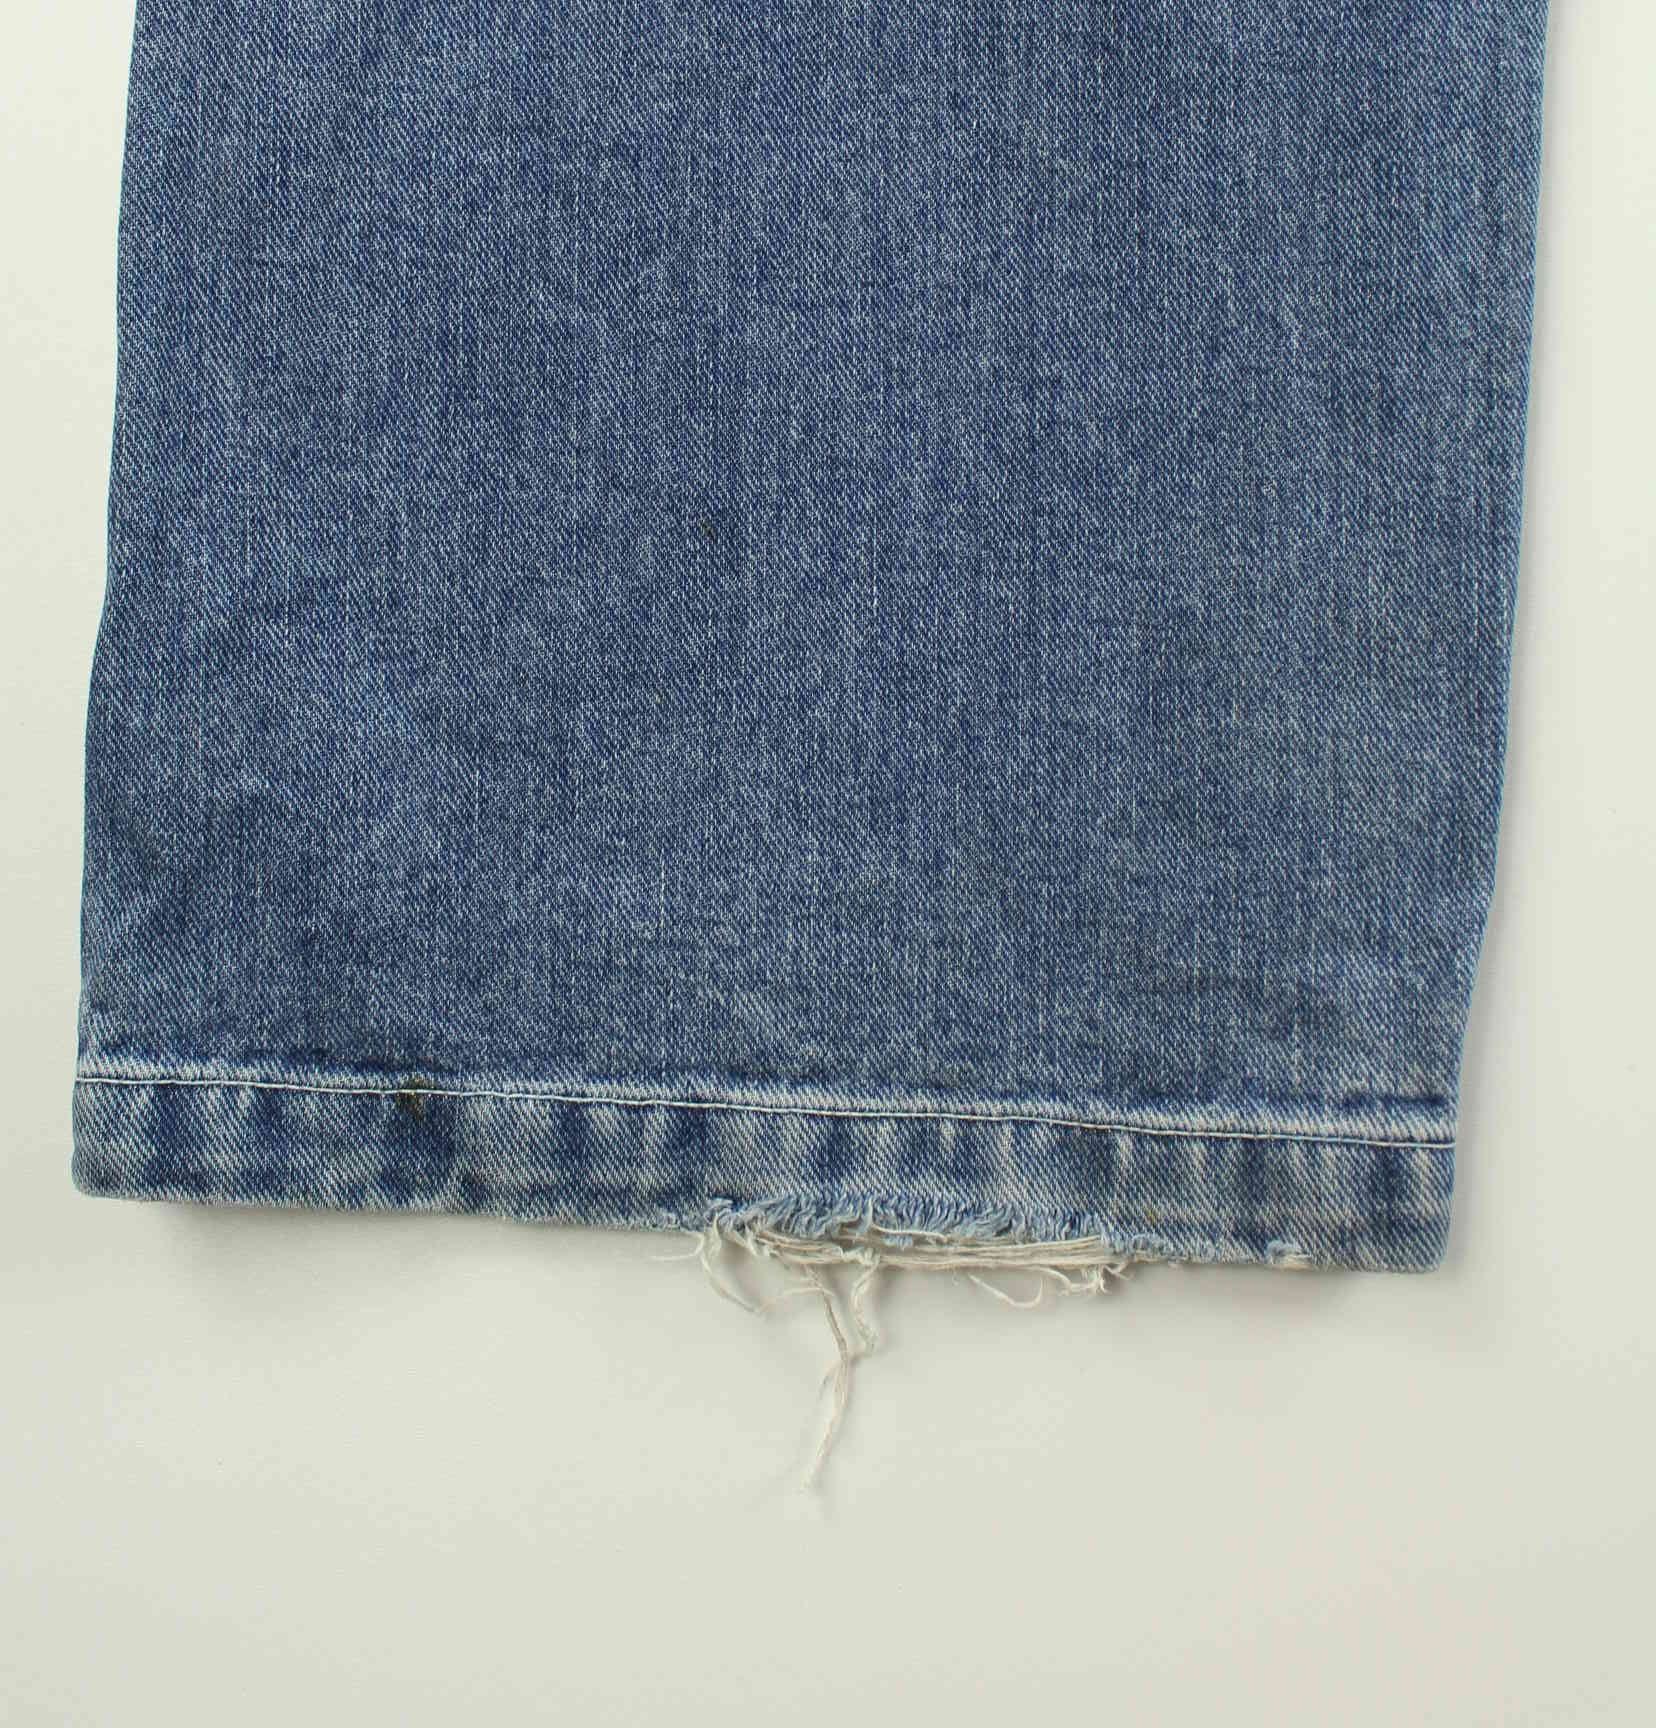 Vintage 90s Full Count Embroidered Jeans Blau W33 L34 (detail image 2)